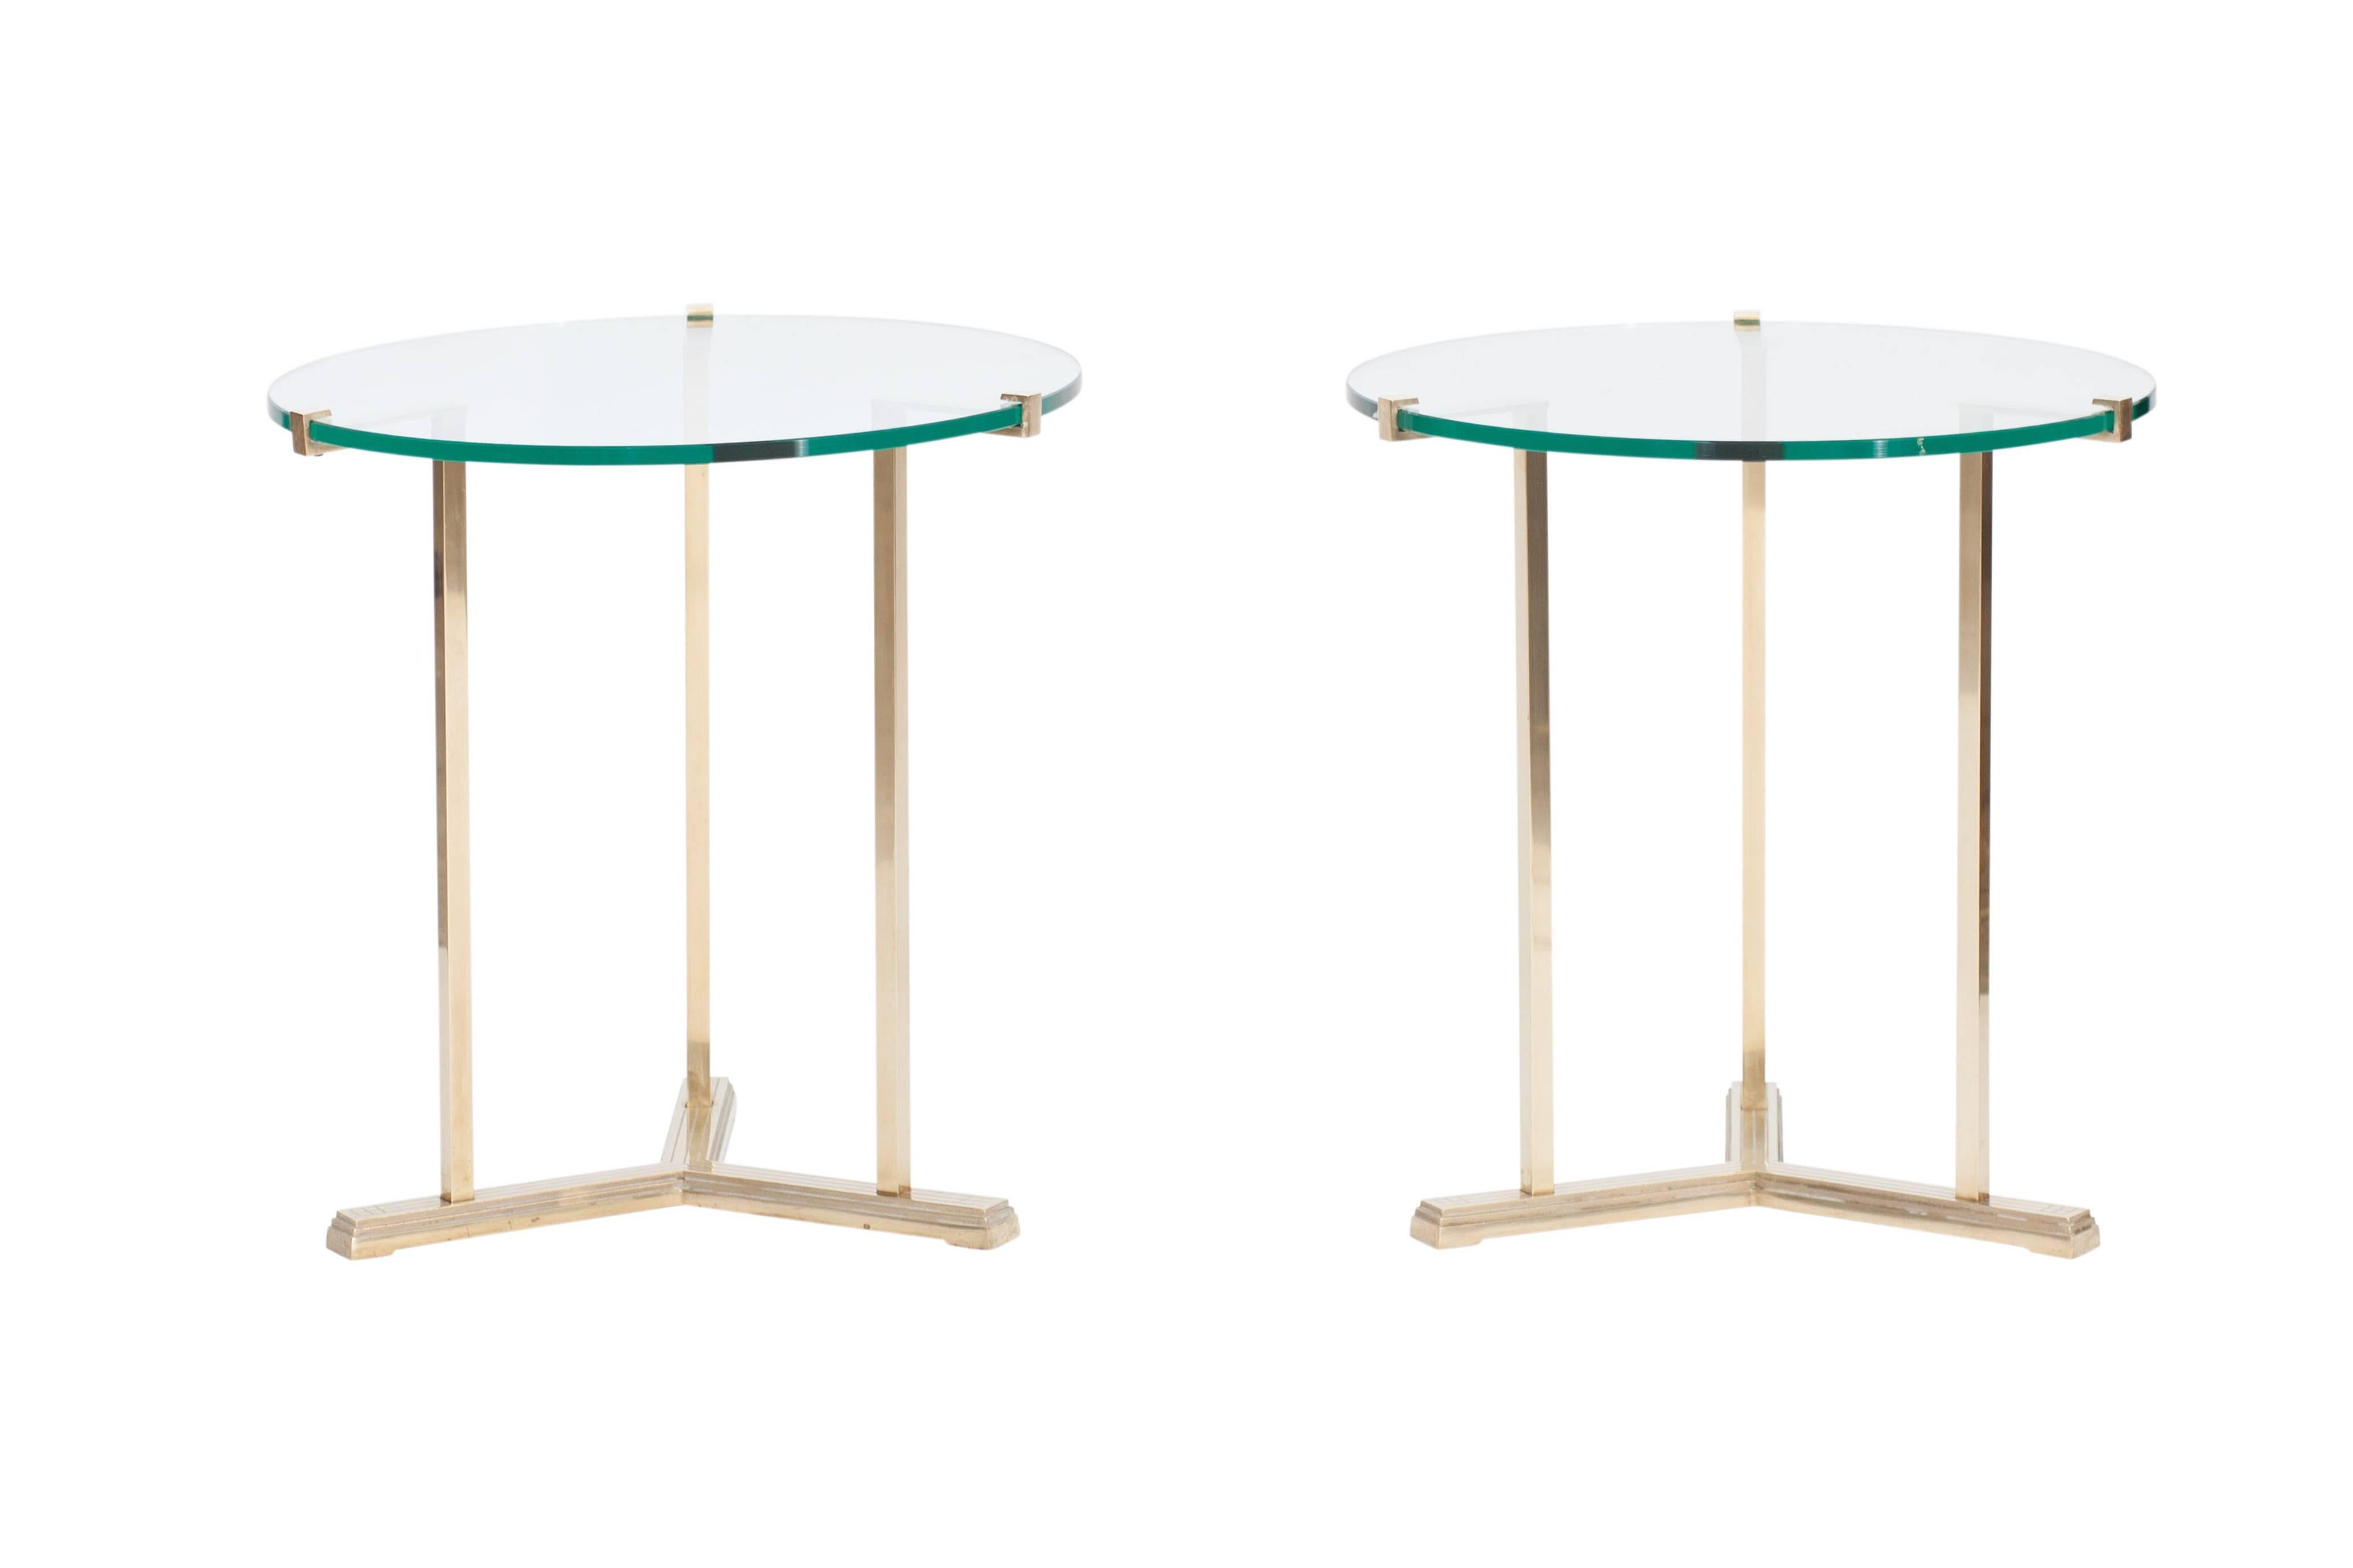 Hollywood Regency side tables by Peter Ghyczy.

Round clear glass top mounted in a brass frame.

Hollywood Regency Italian glam style.

Measures: H 63 cm, Ø 60 cm.